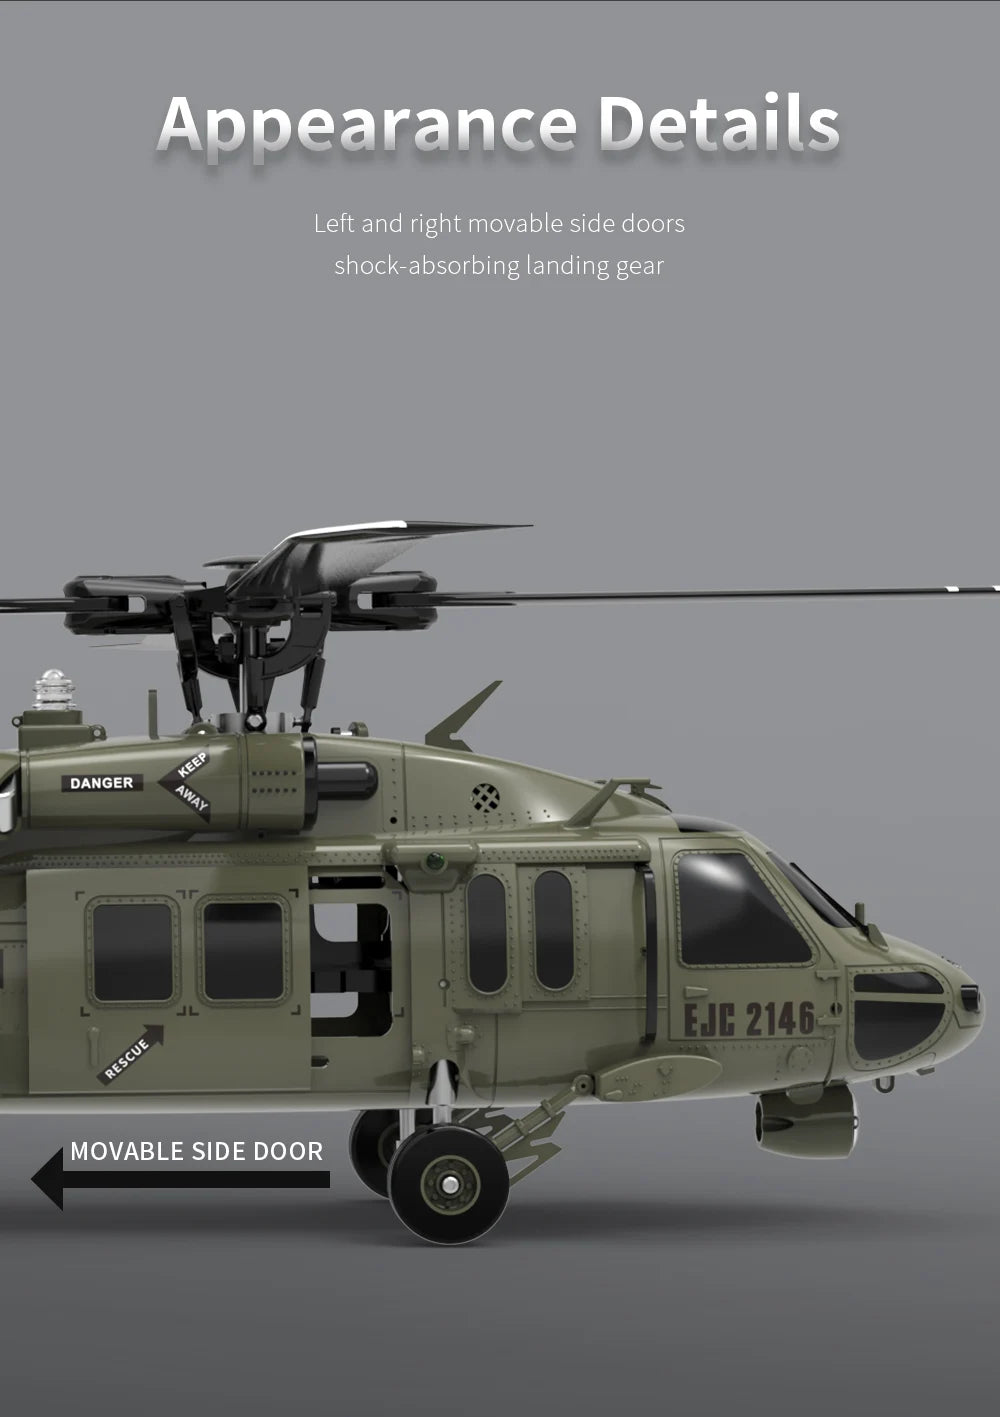 F09 6-Axis RC Helicopter, Appearance Details Left and right movable side doors shock-absorbing landing gear DANG